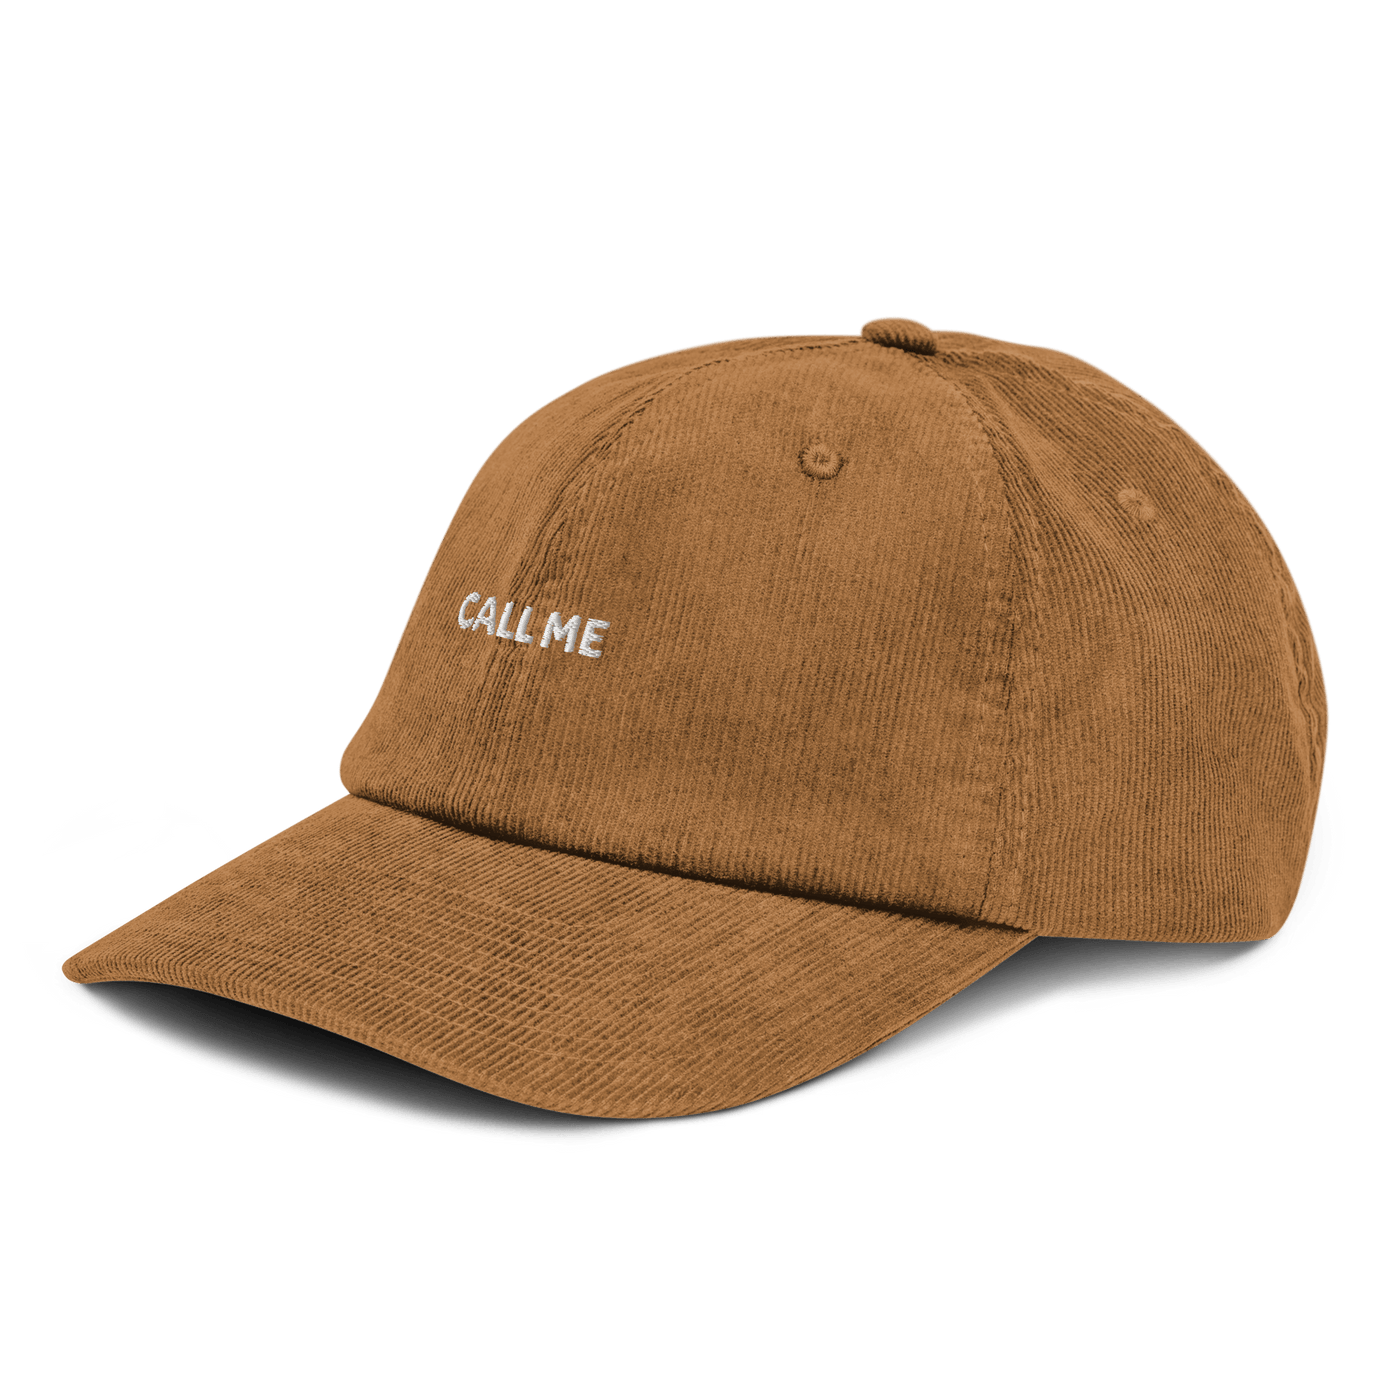 Call me Corduroy hat - Camel - - Just Another Cap Store